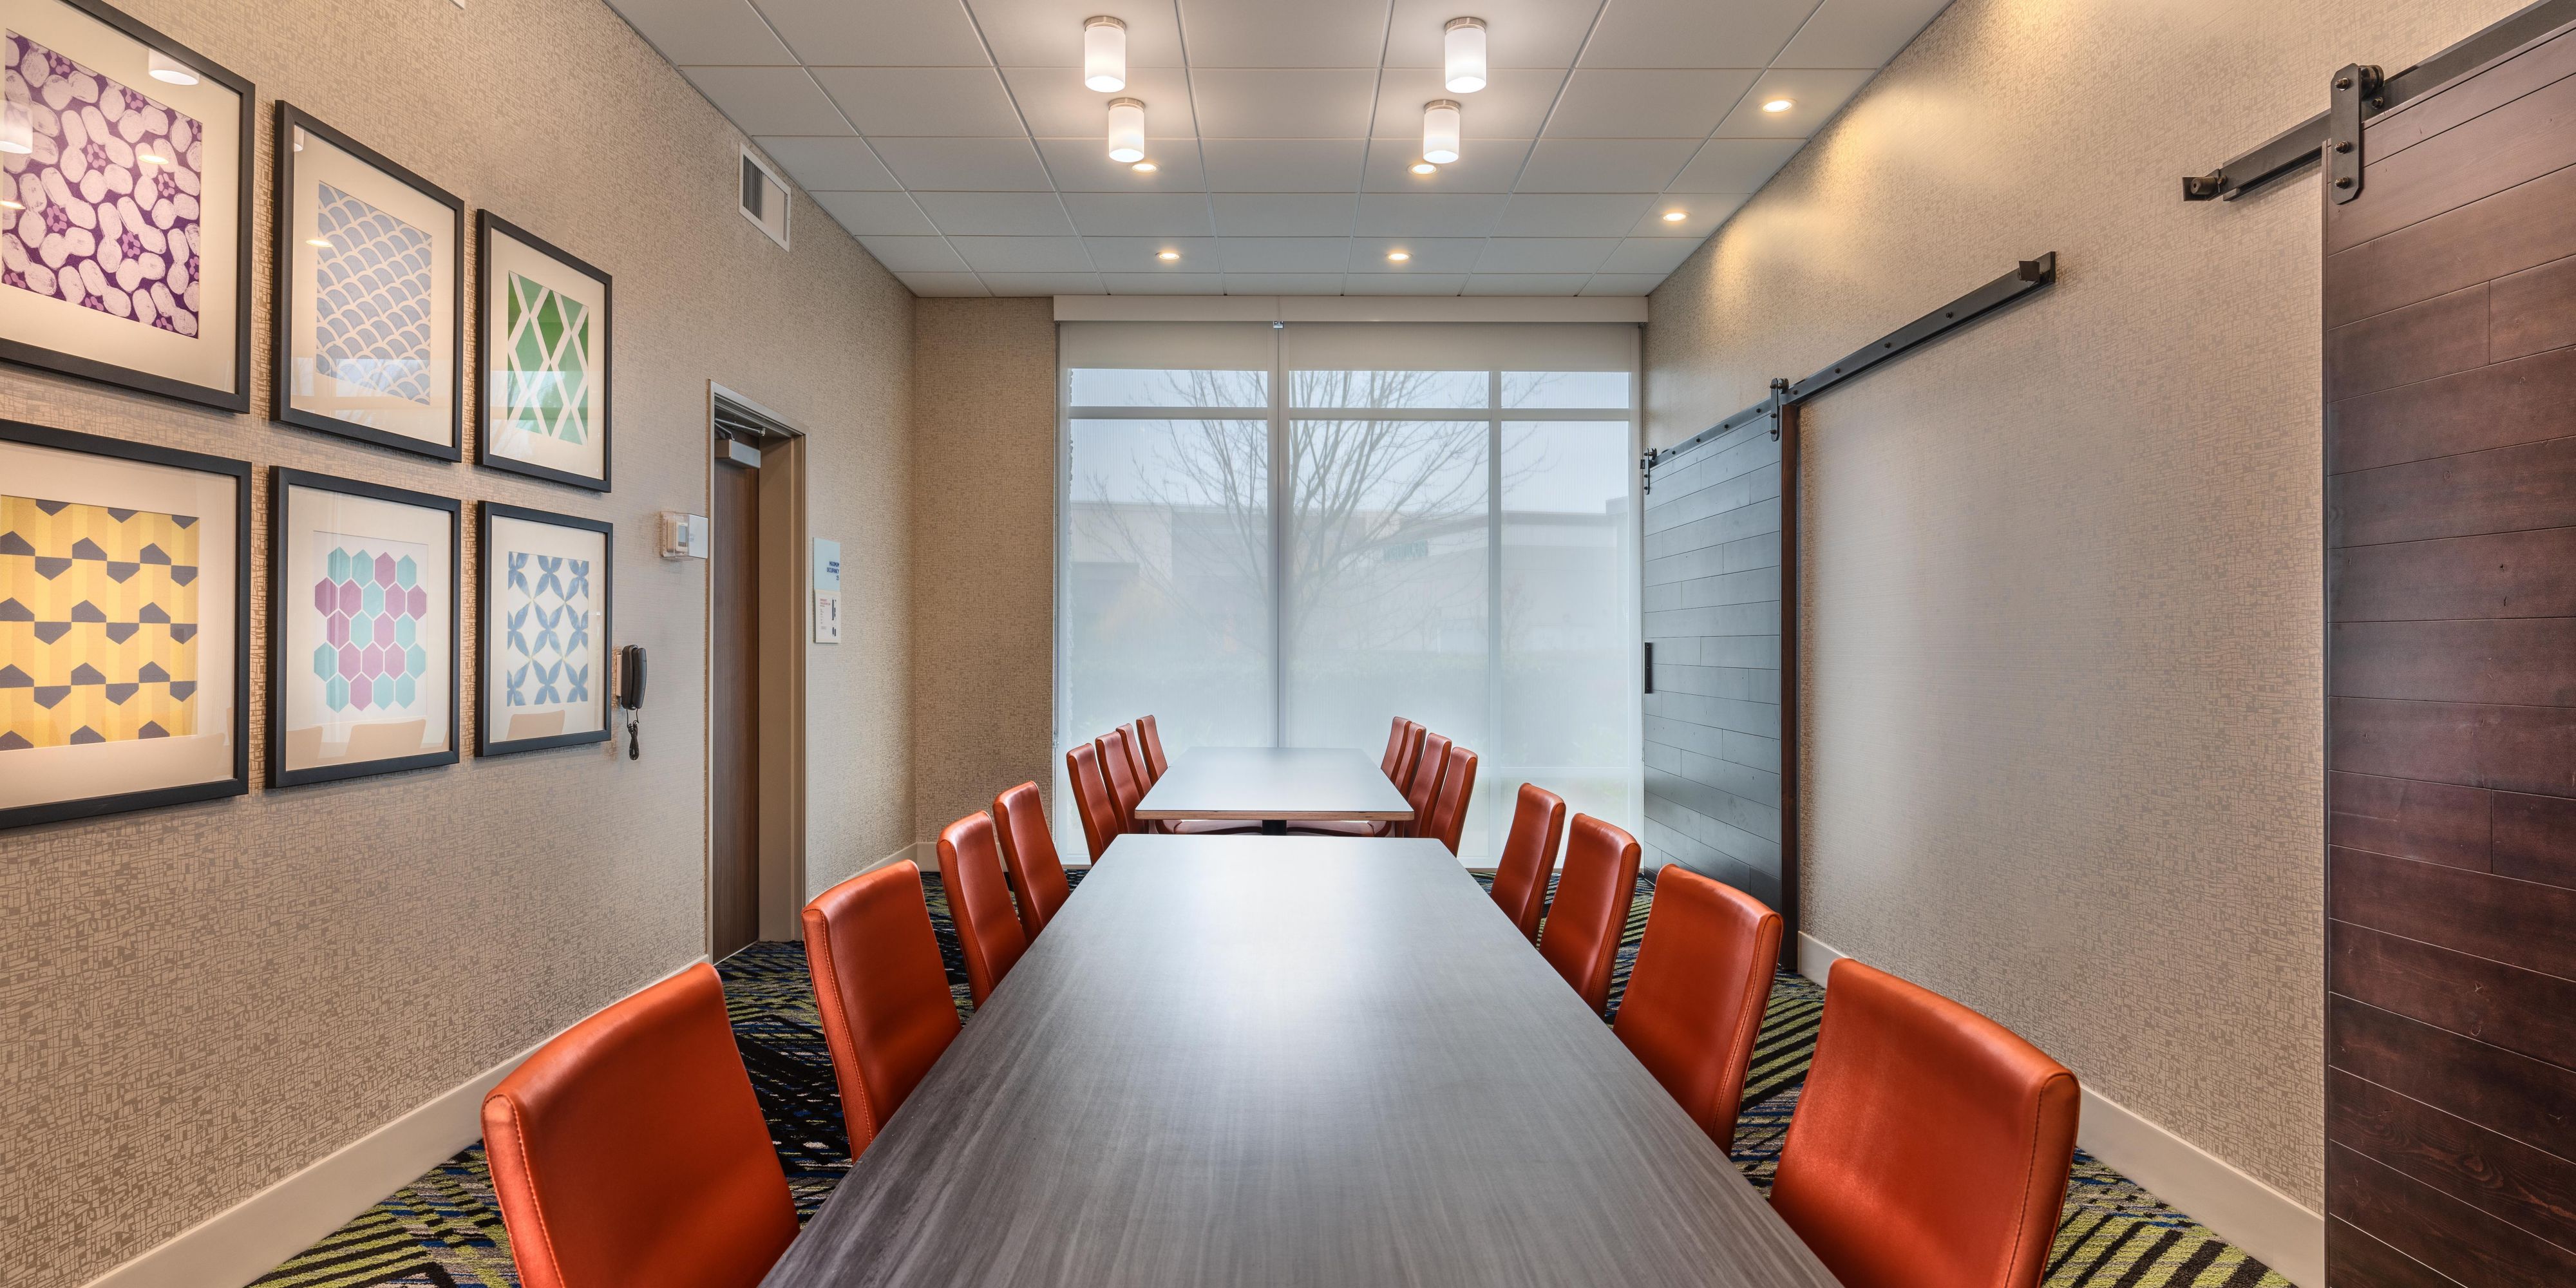 Hosting a small gathering or corporate meeting? We've got you covered with our boardroom offering 324 square feet of space. Room includes a large TV with HDMI capability.